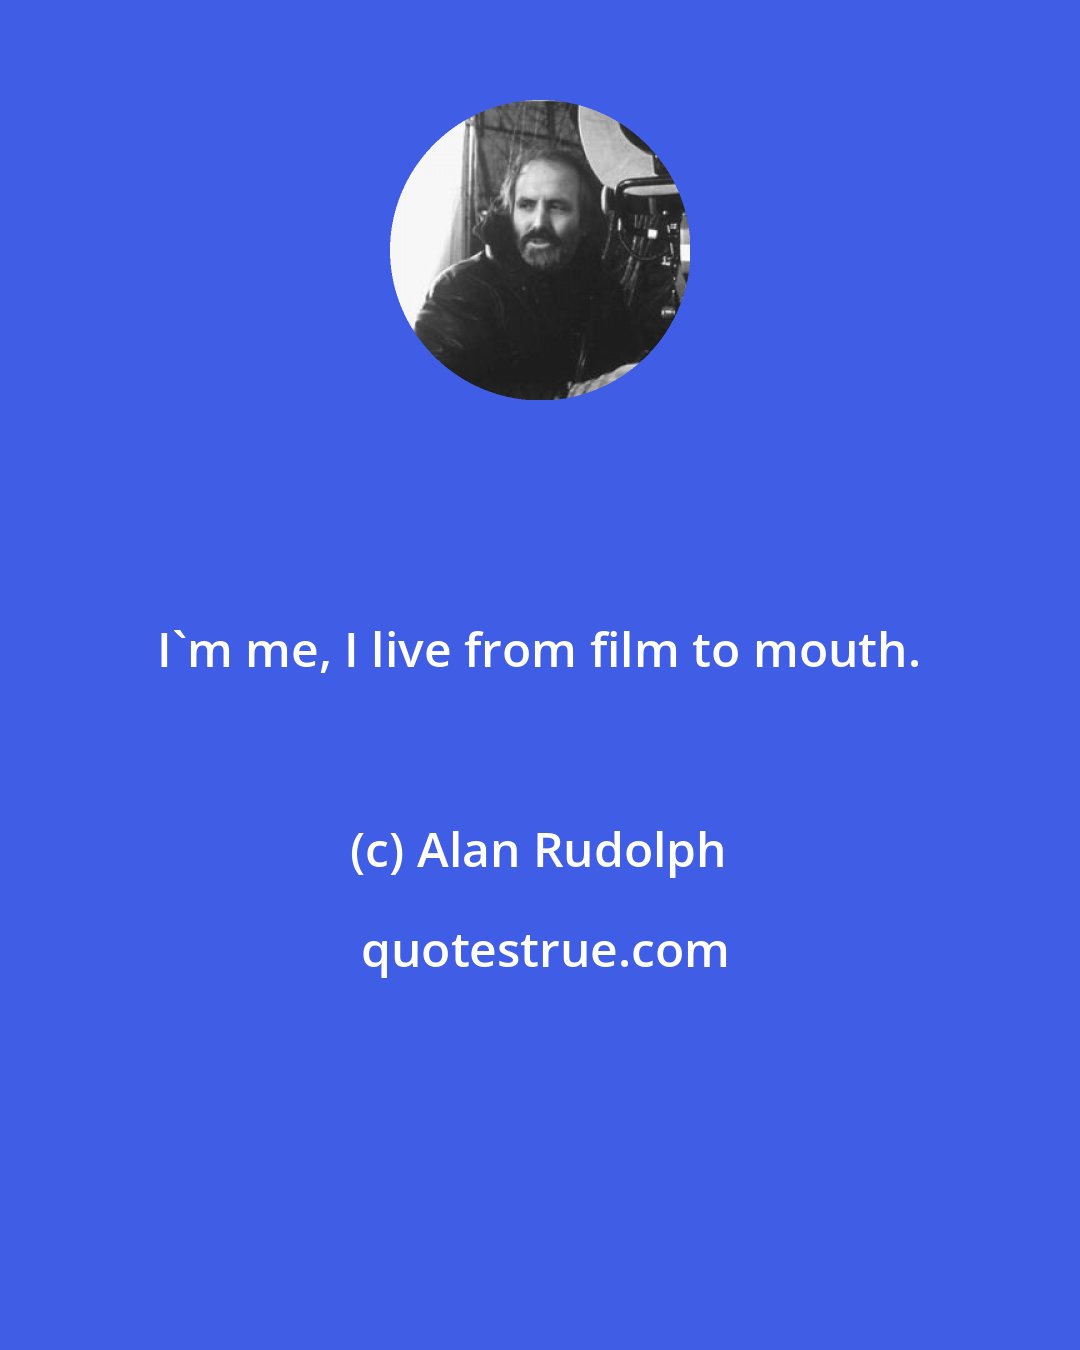 Alan Rudolph: I'm me, I live from film to mouth.